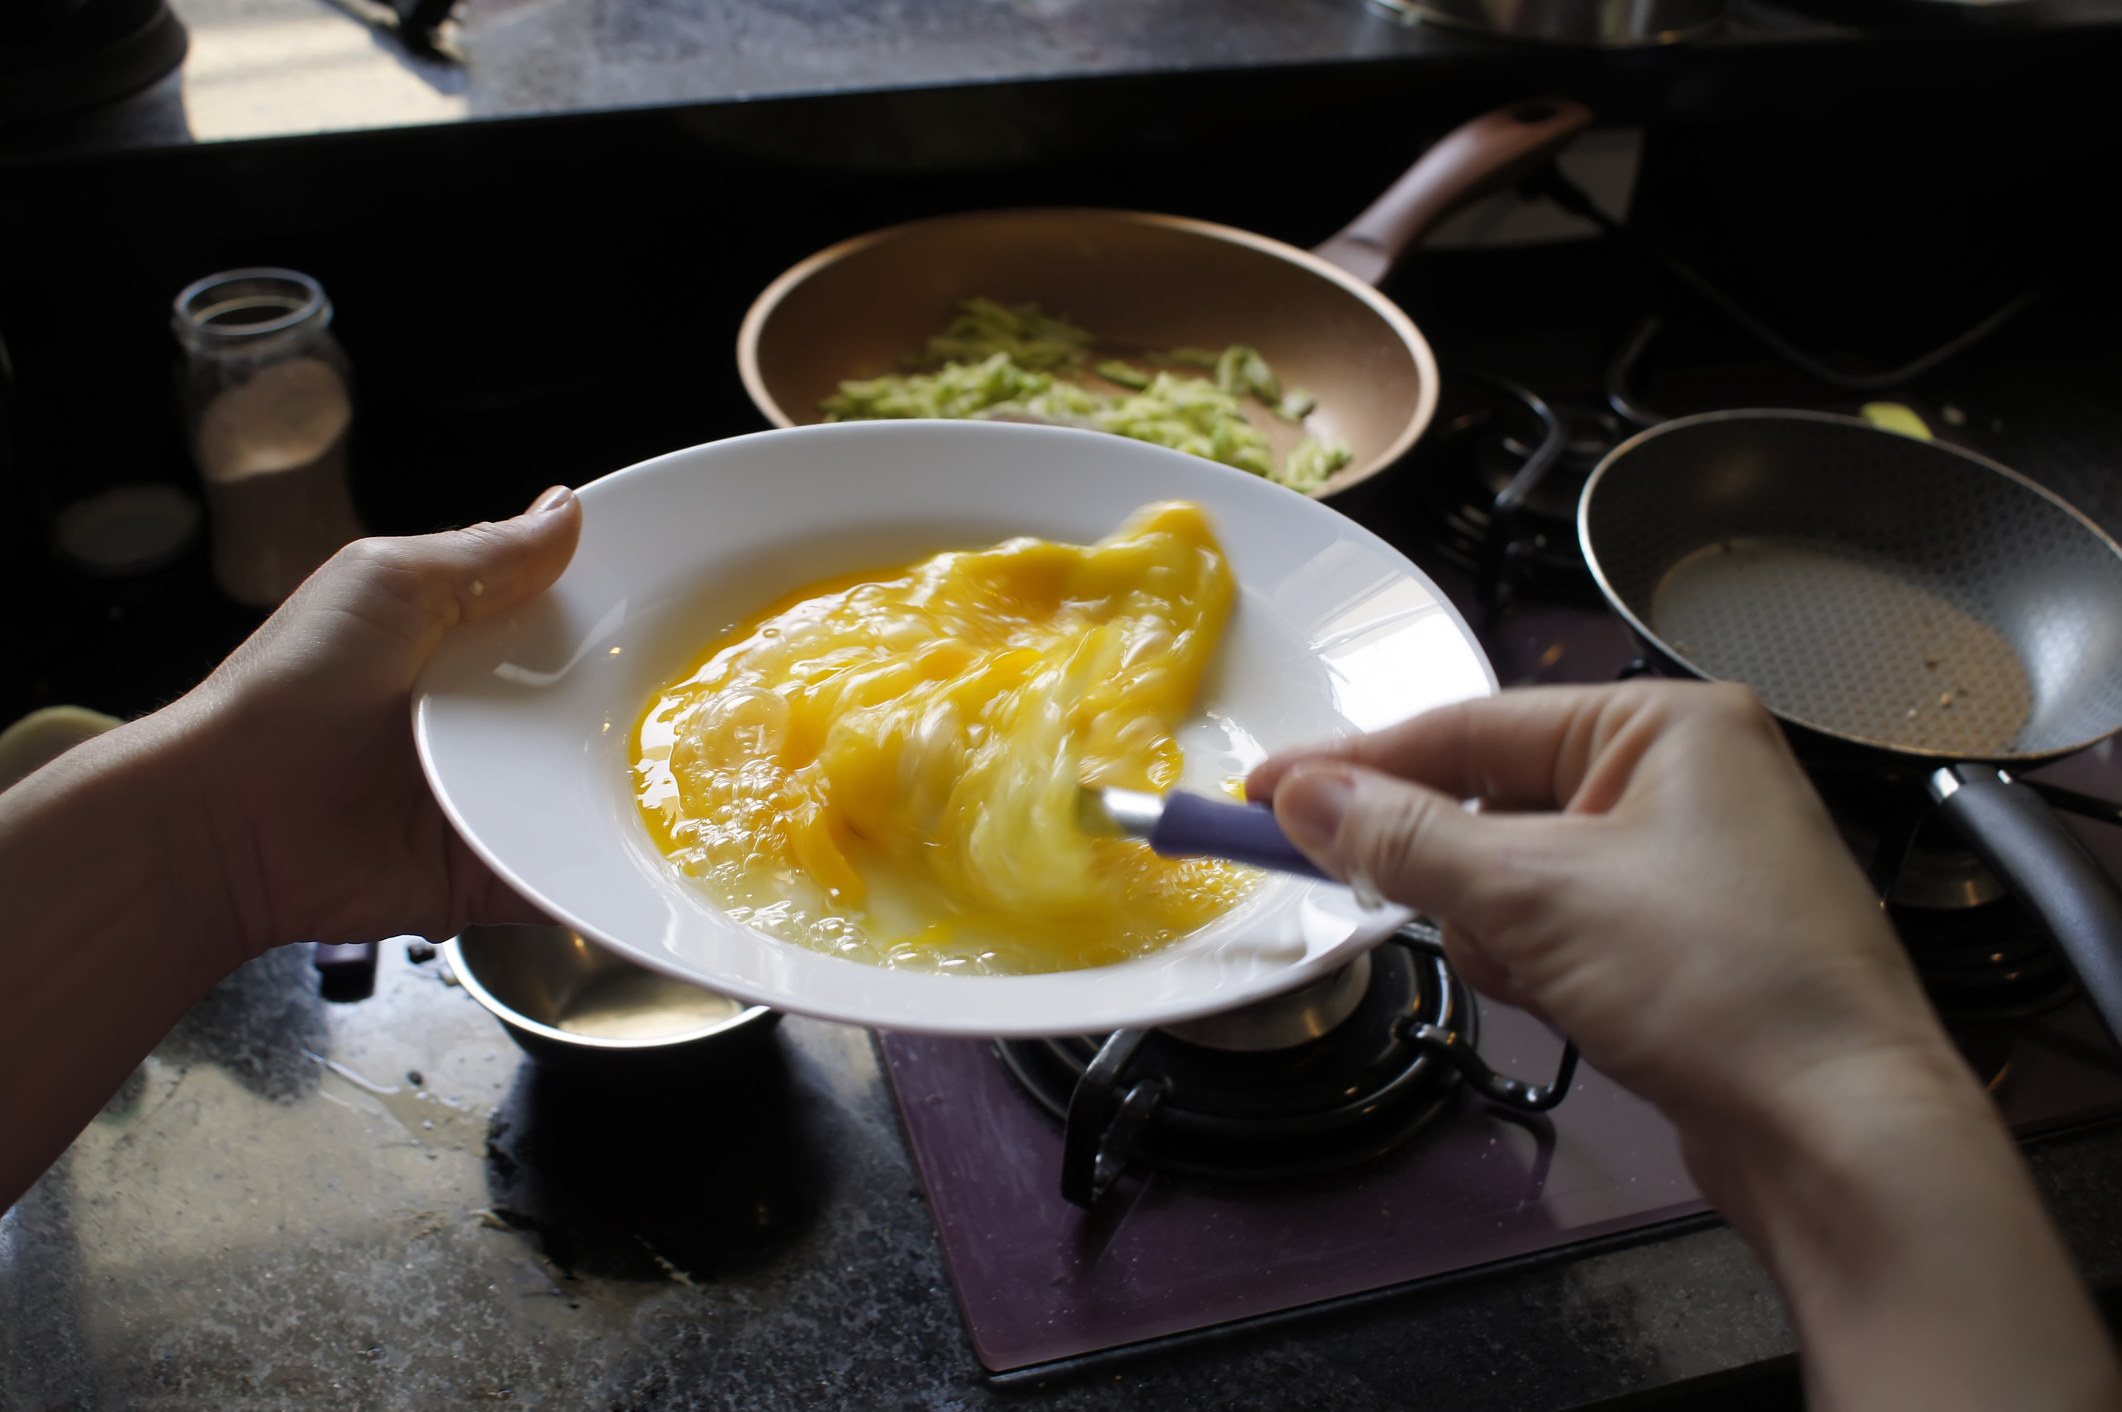 Preparing an omelet with zucchini